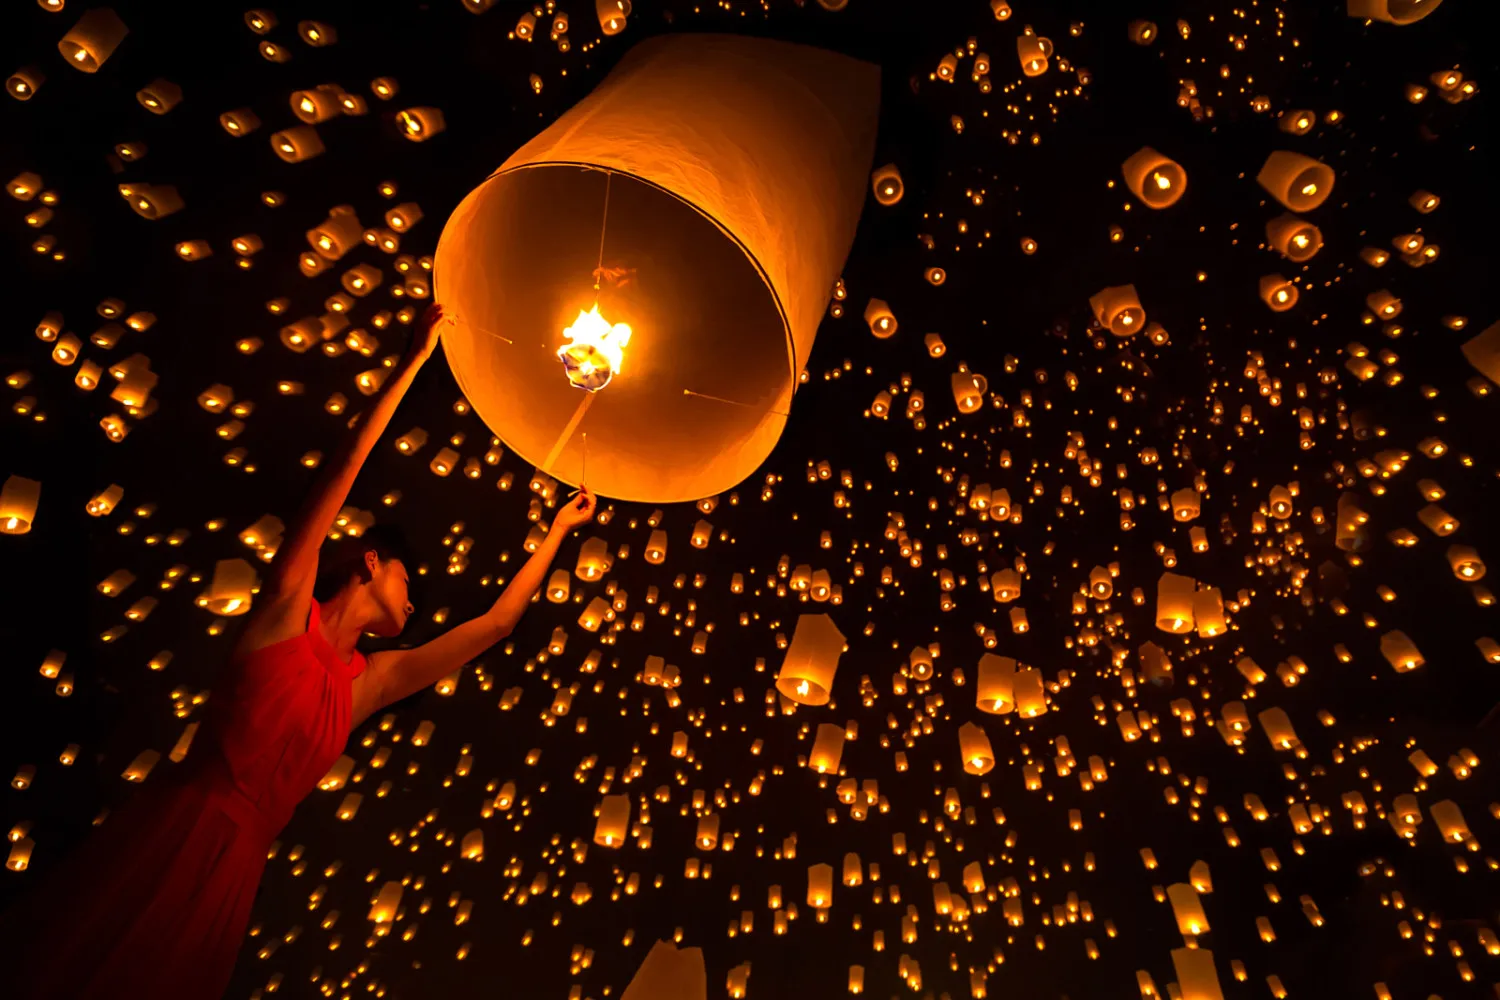 paper lanterns from china